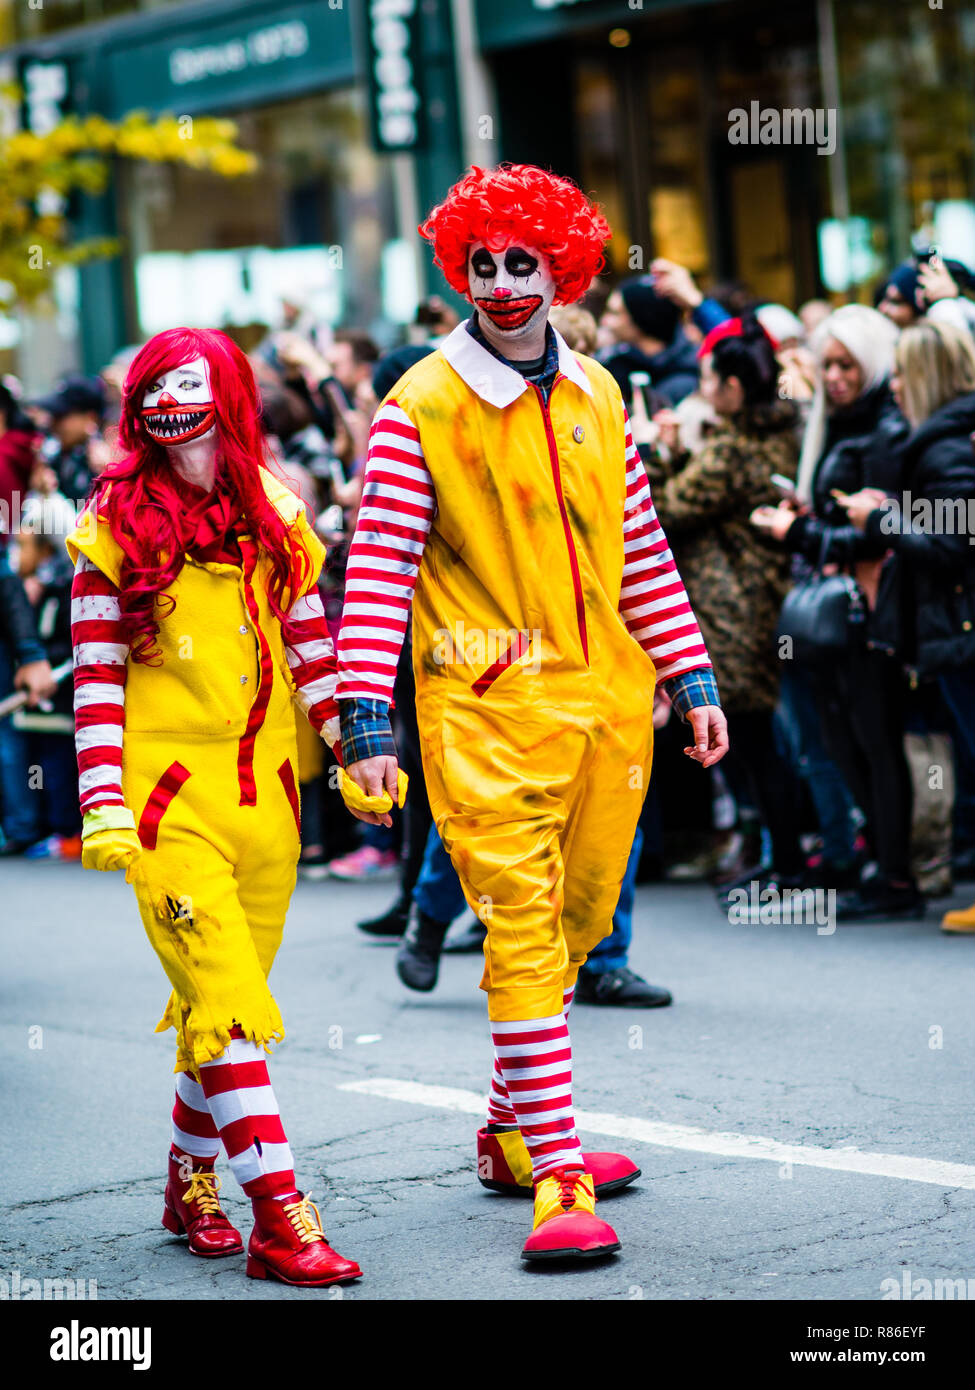 Zombie parade in Montreal Quebec Canada Stock Photo